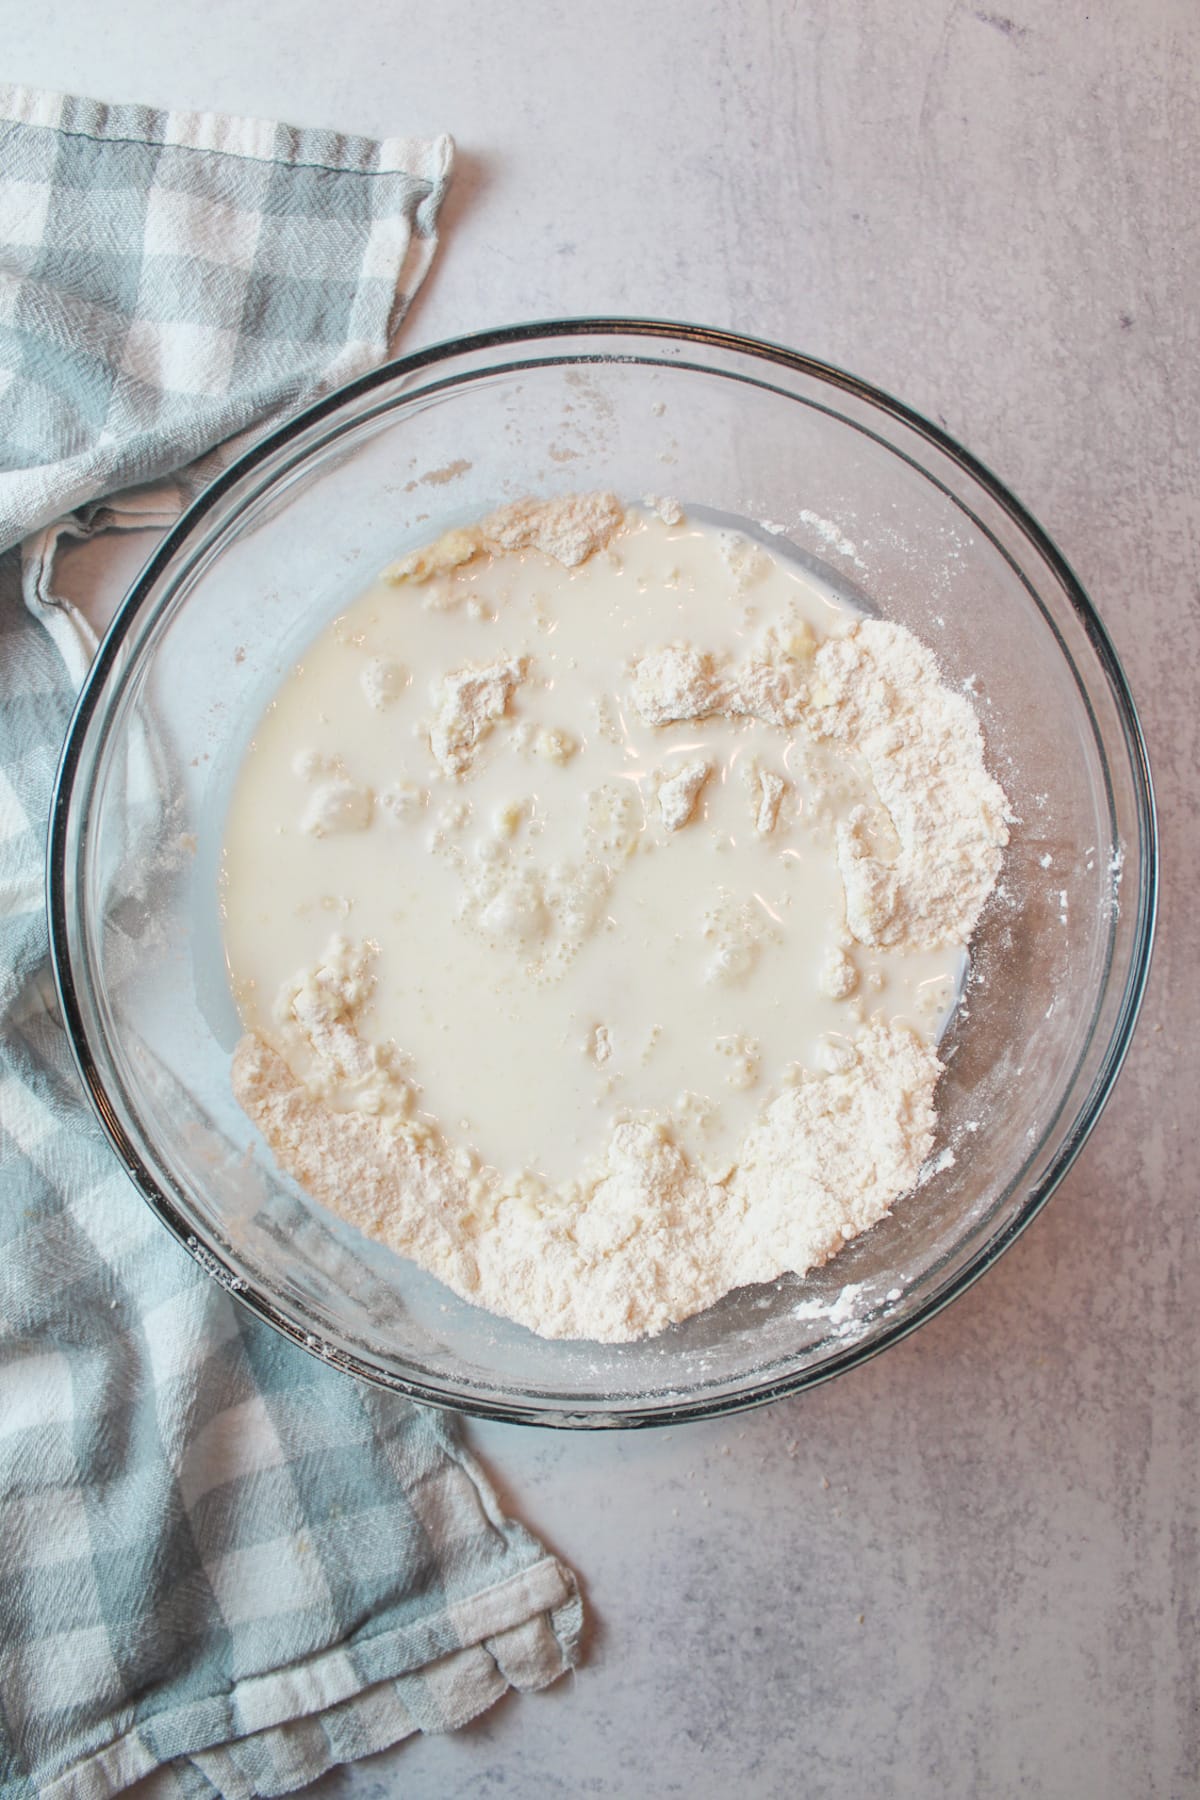 milk added to butter and flour mixture in a glass mixing bowl